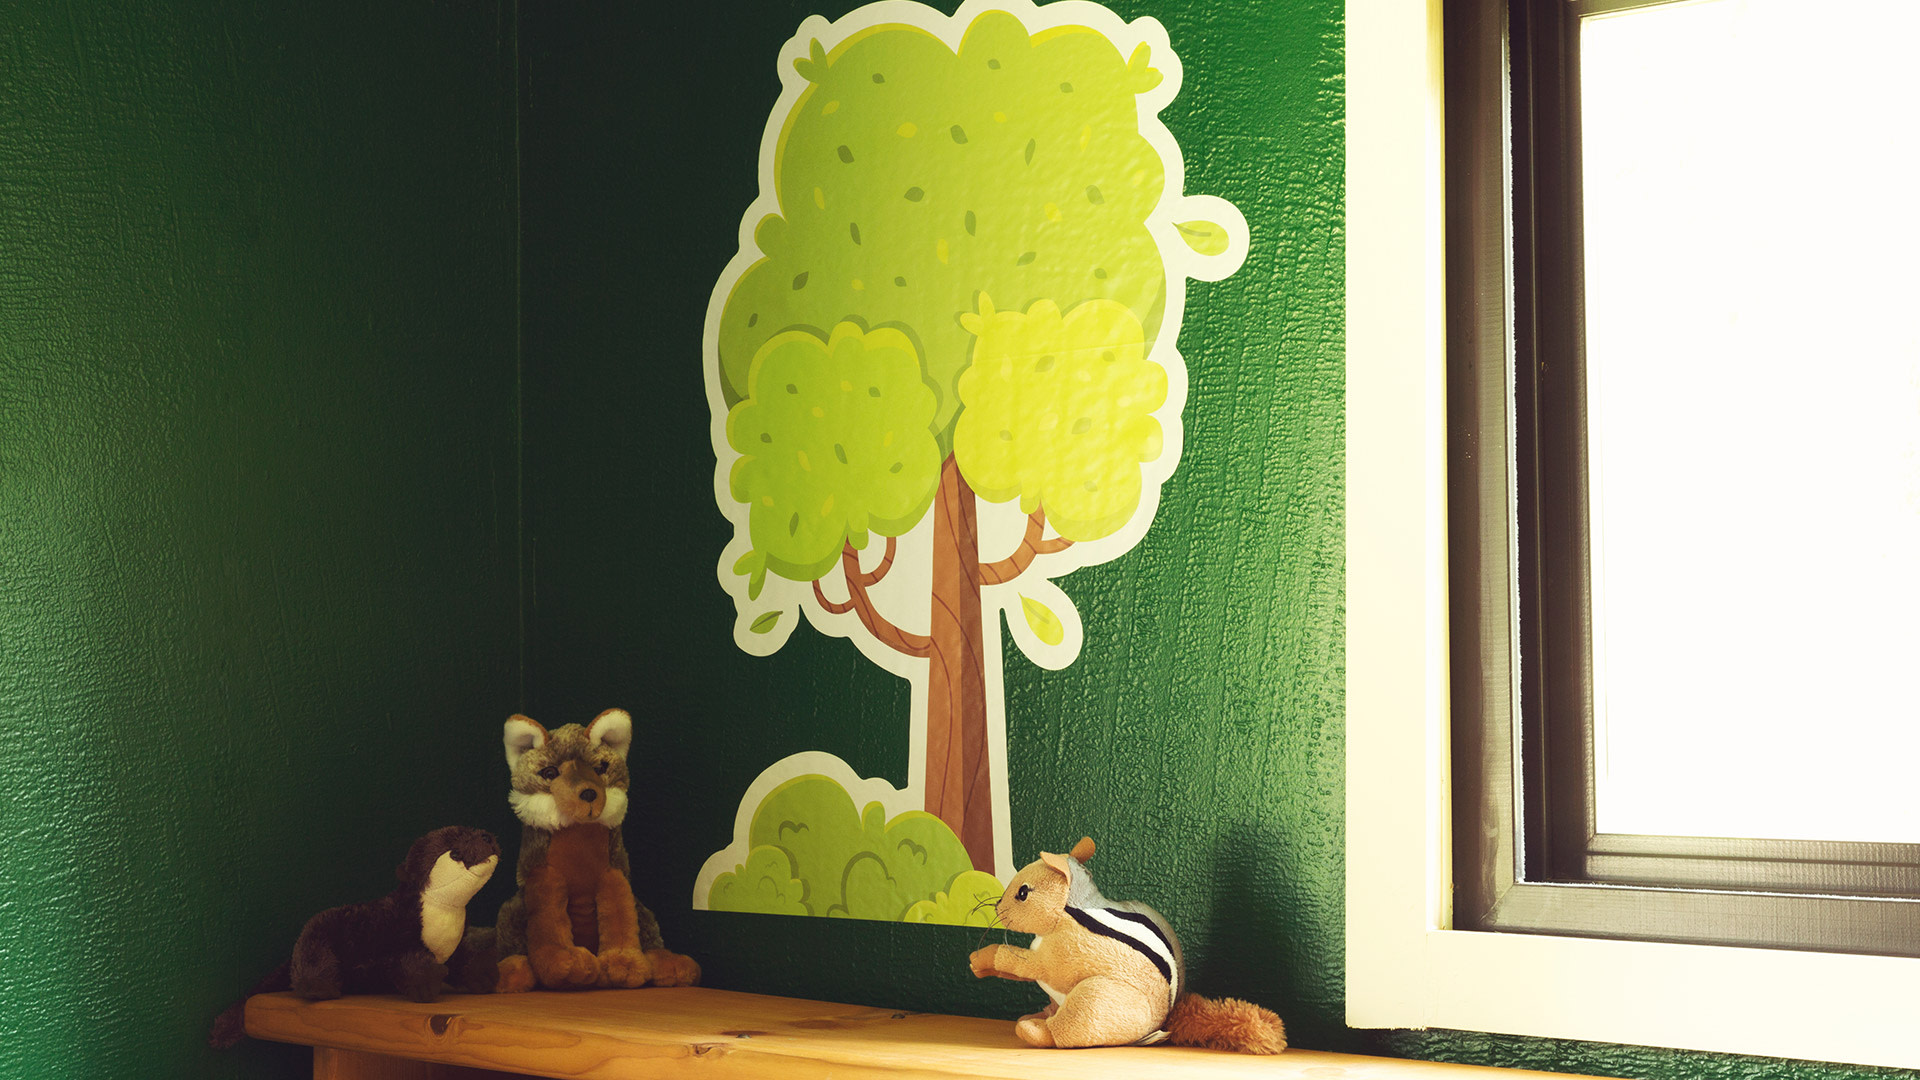 a custom printed die cut wall graphic of a tree for a kids room